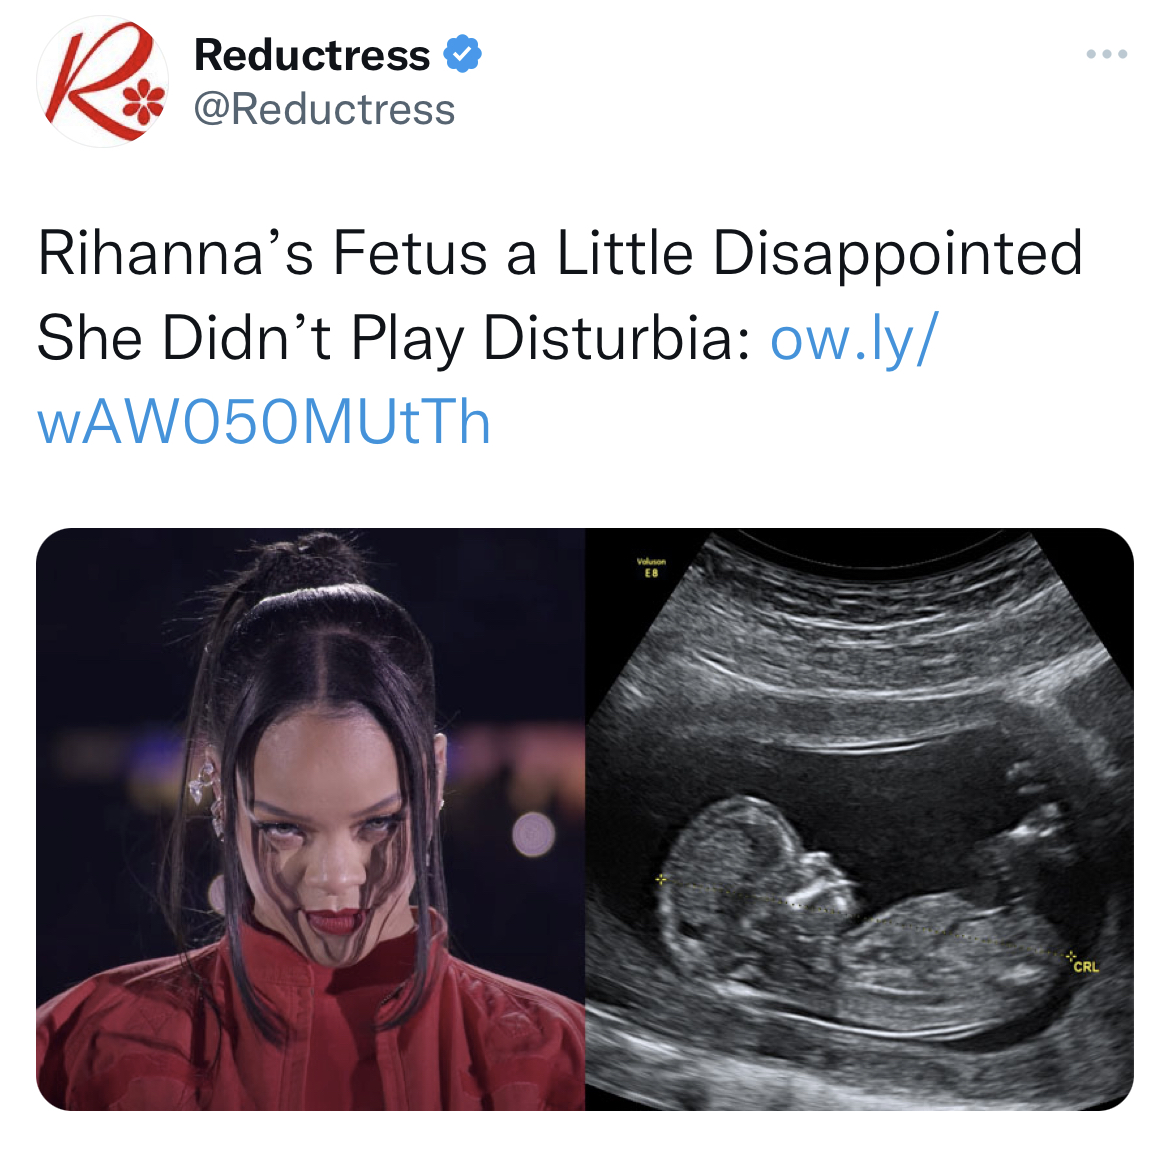 deranged tweets - jaw - Reductress Rihanna's Fetus a Little Disappointed She Didn't Play Disturbia ow.ly WAW050MUtTh